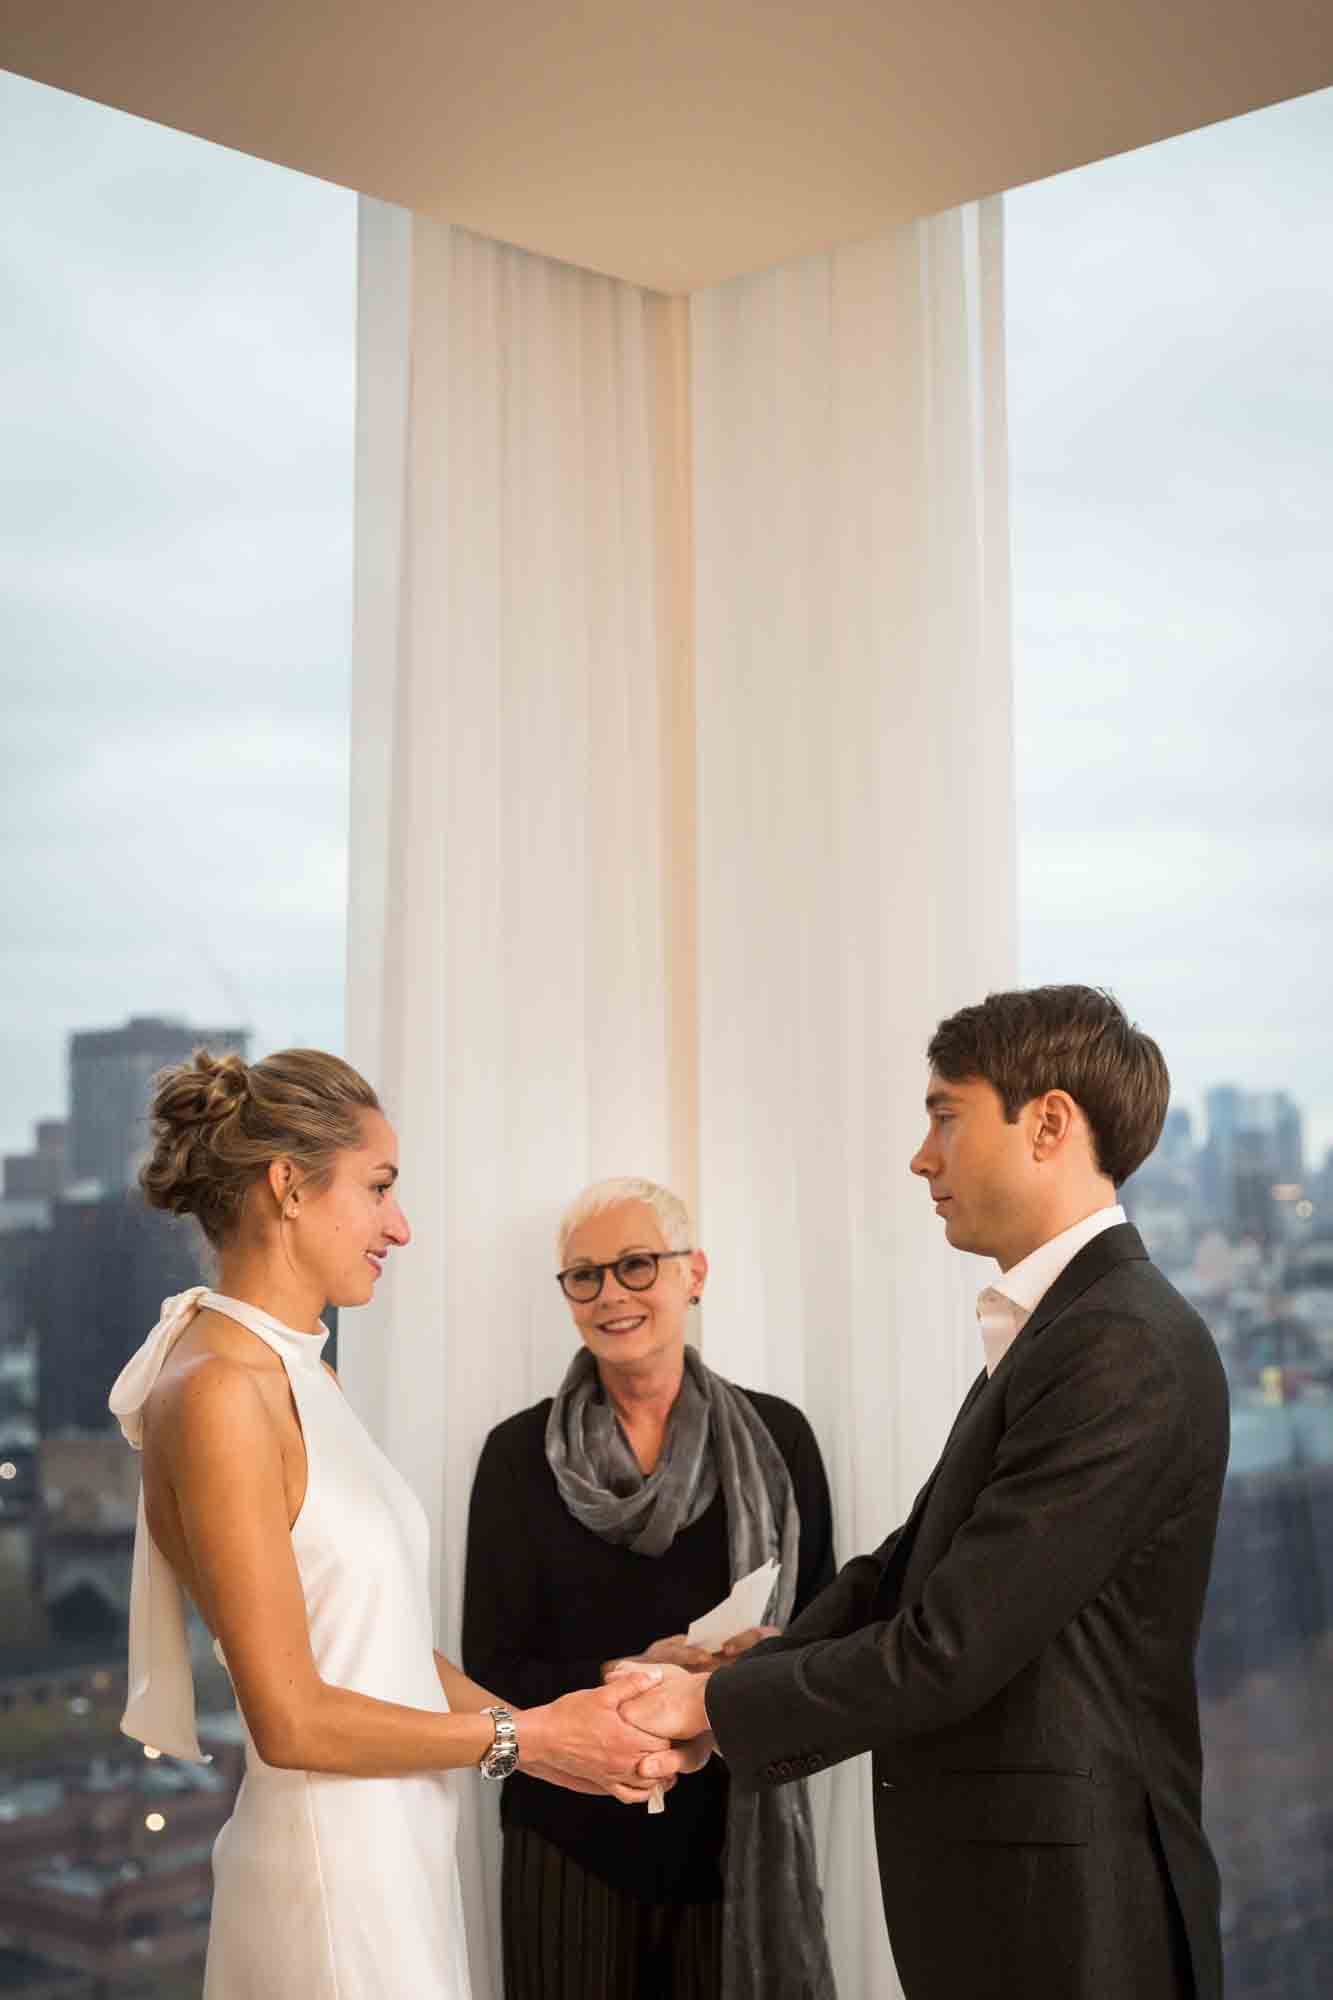 Bride and groom saying vows in front of window at a Public Hotel wedding